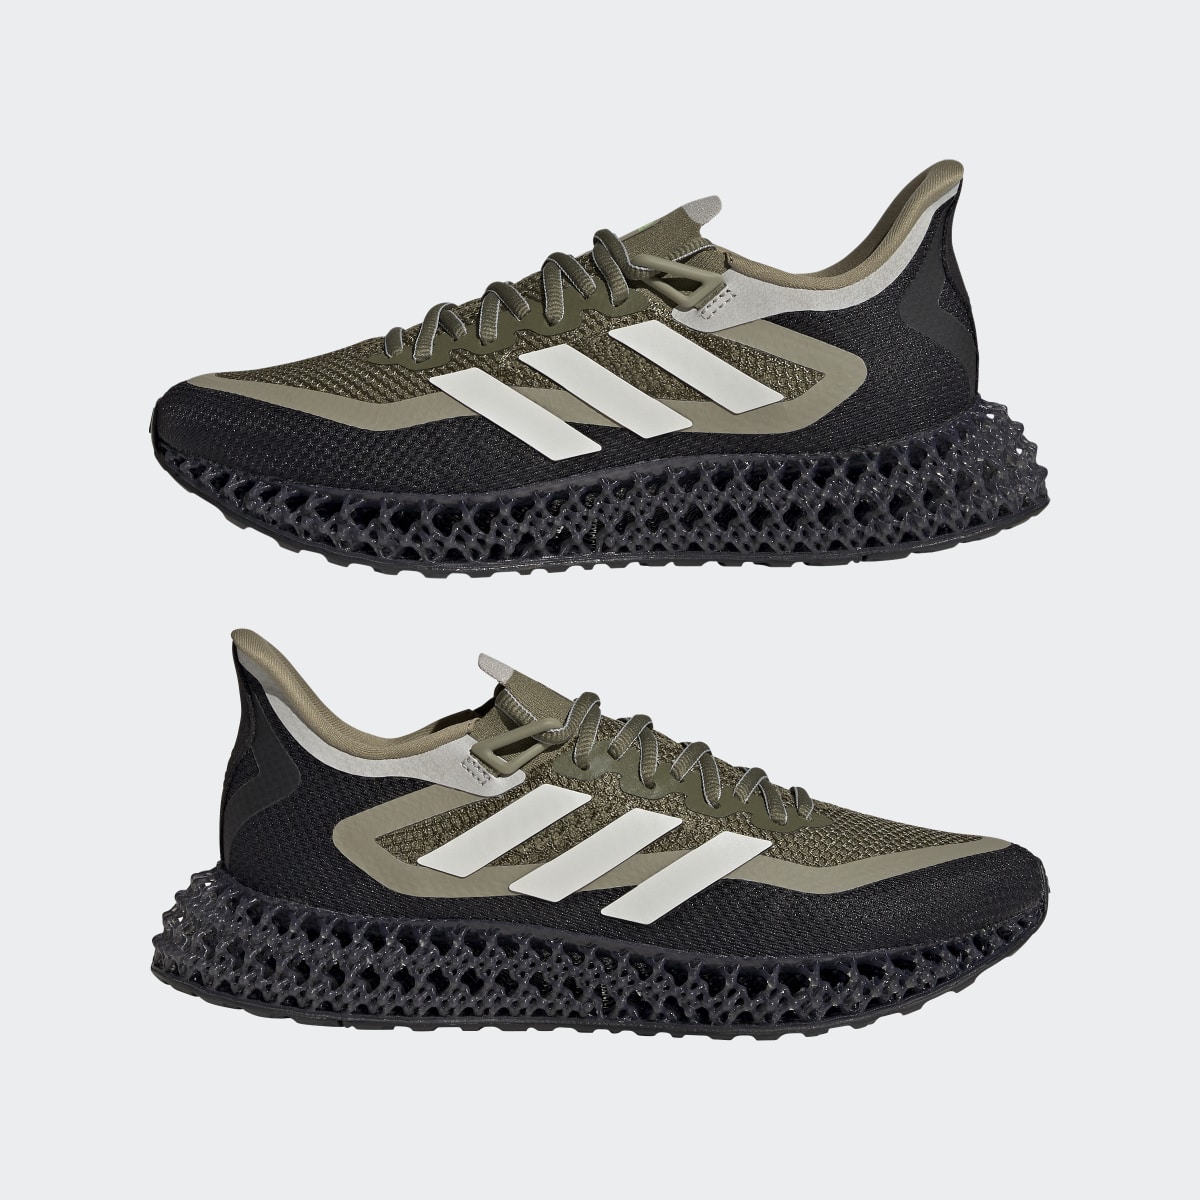 Adidas 4DFWD 2 Running Shoes. 11